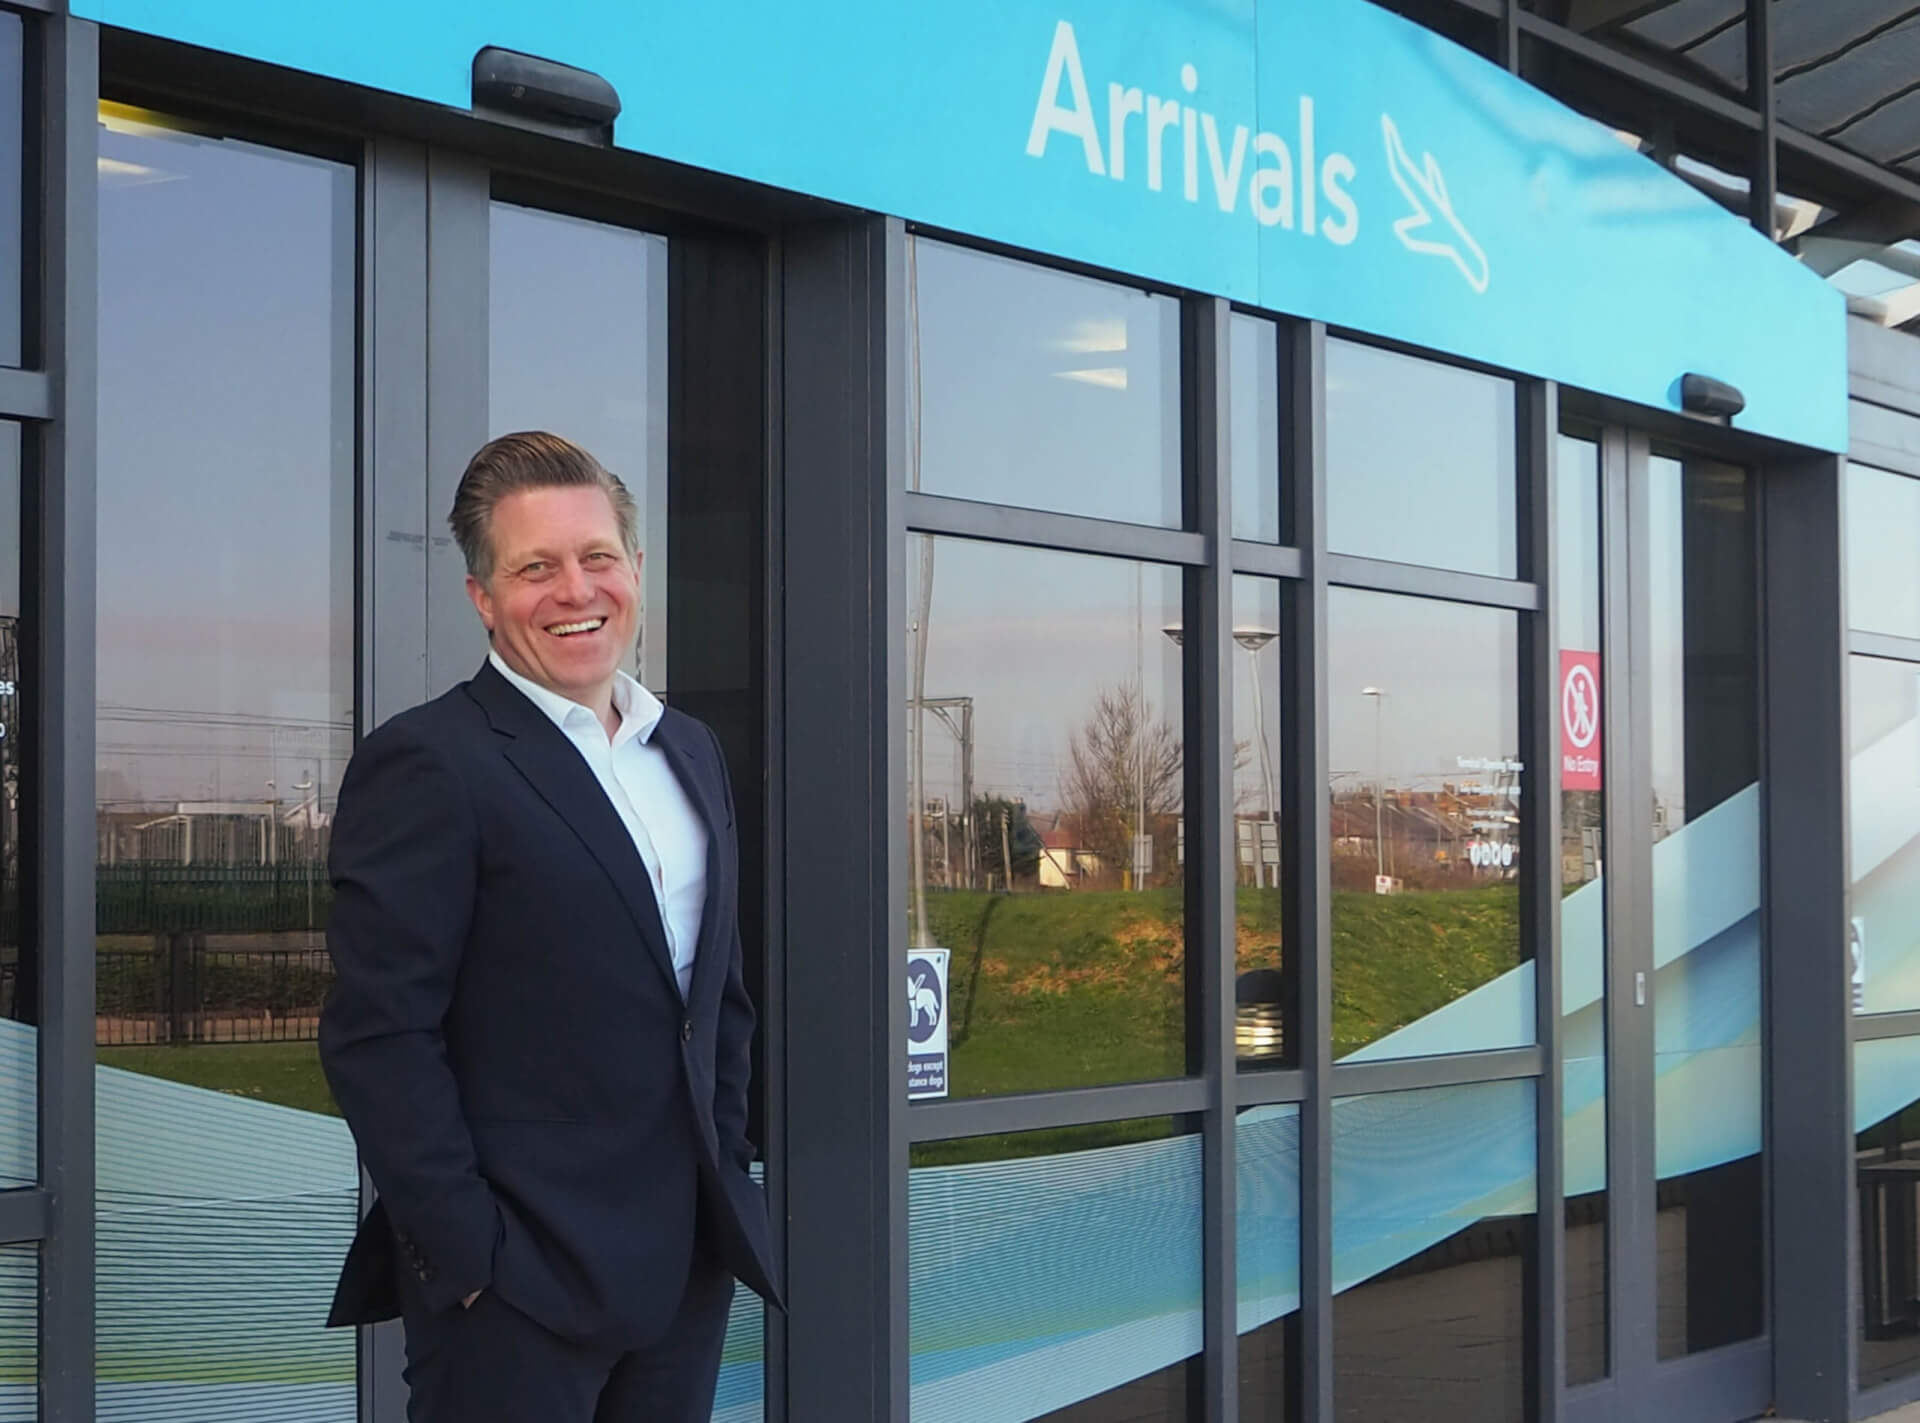 Nigel Mayes, Business Development Director at London Southend Airport